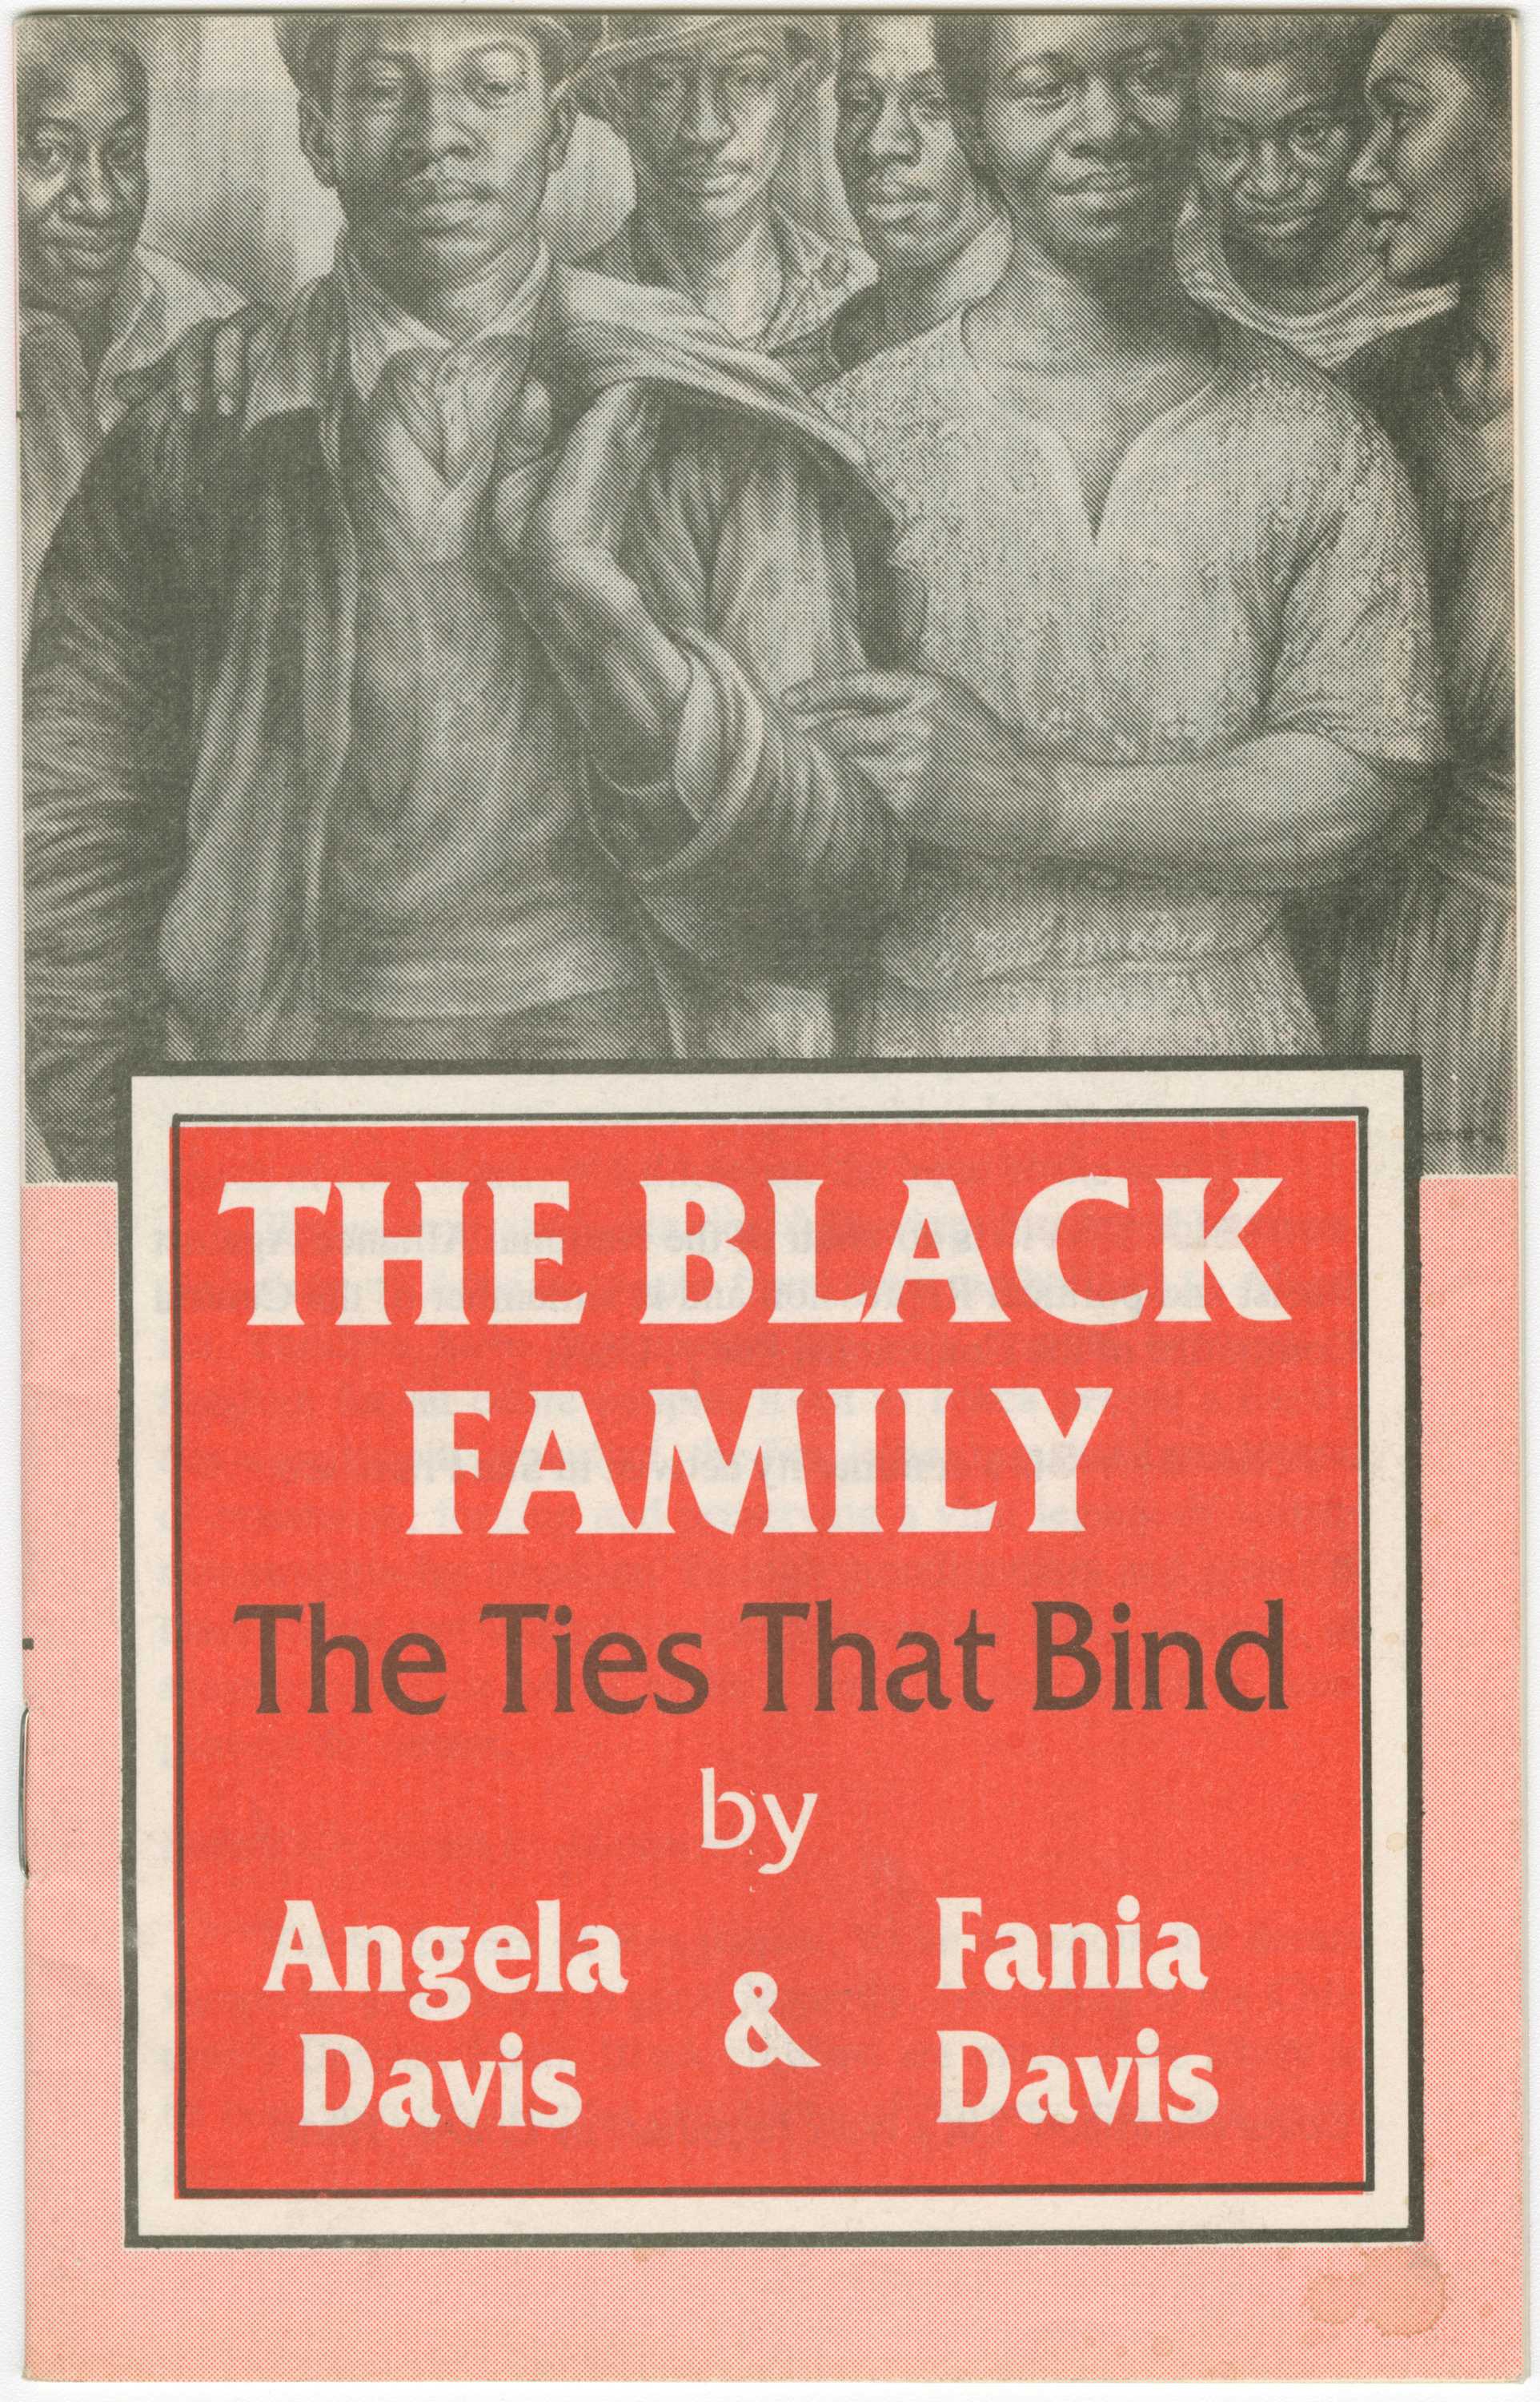 Image of the cover of The Black Family pamphlet with an image of a family.